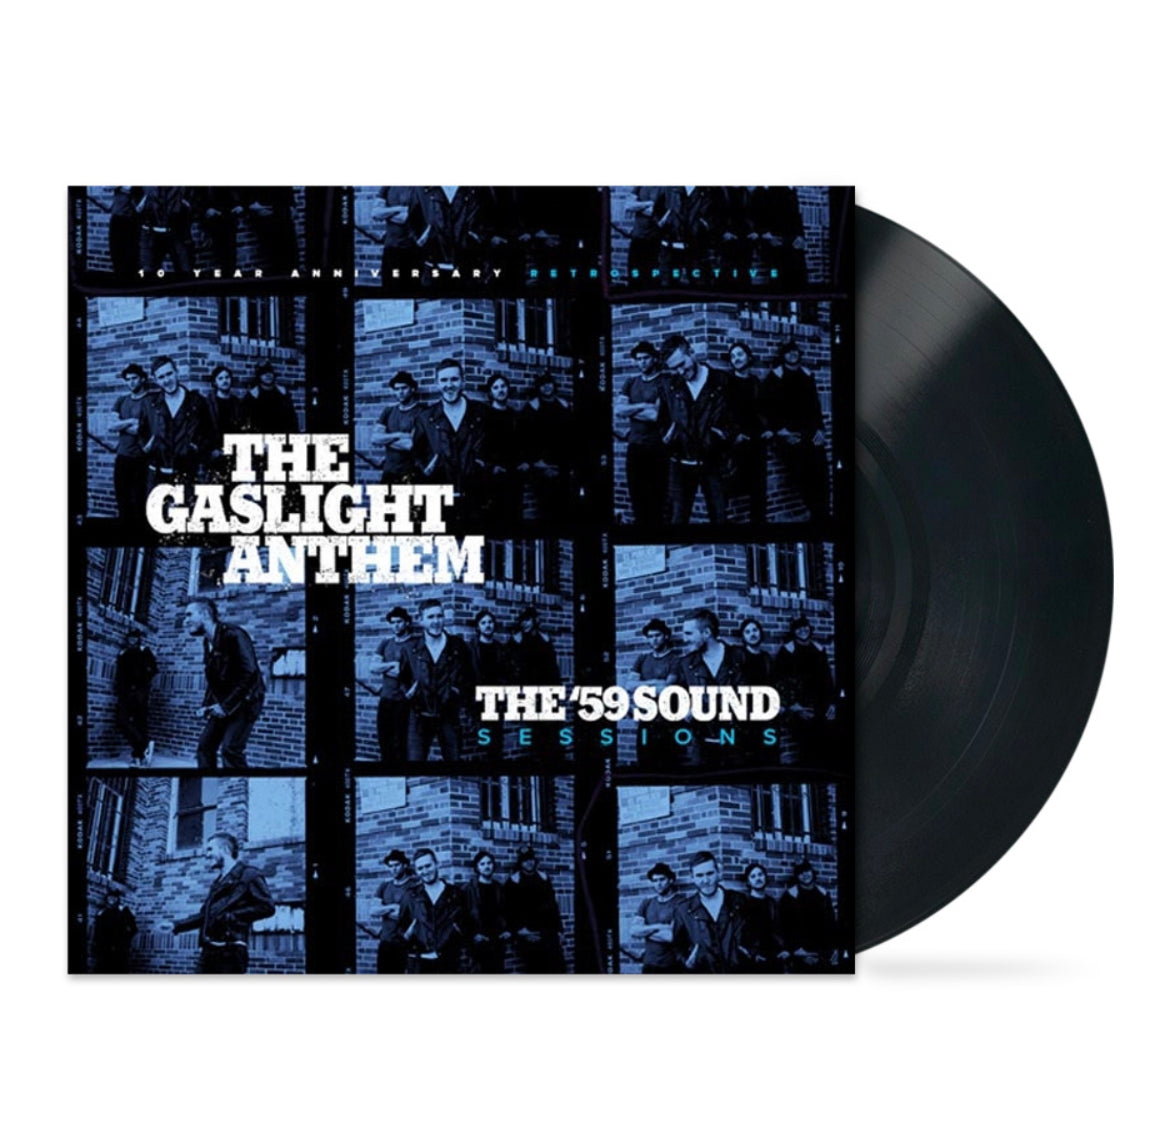 The Gaslight Anthem: The '59 Sound Sessions Limited Deluxe Edition